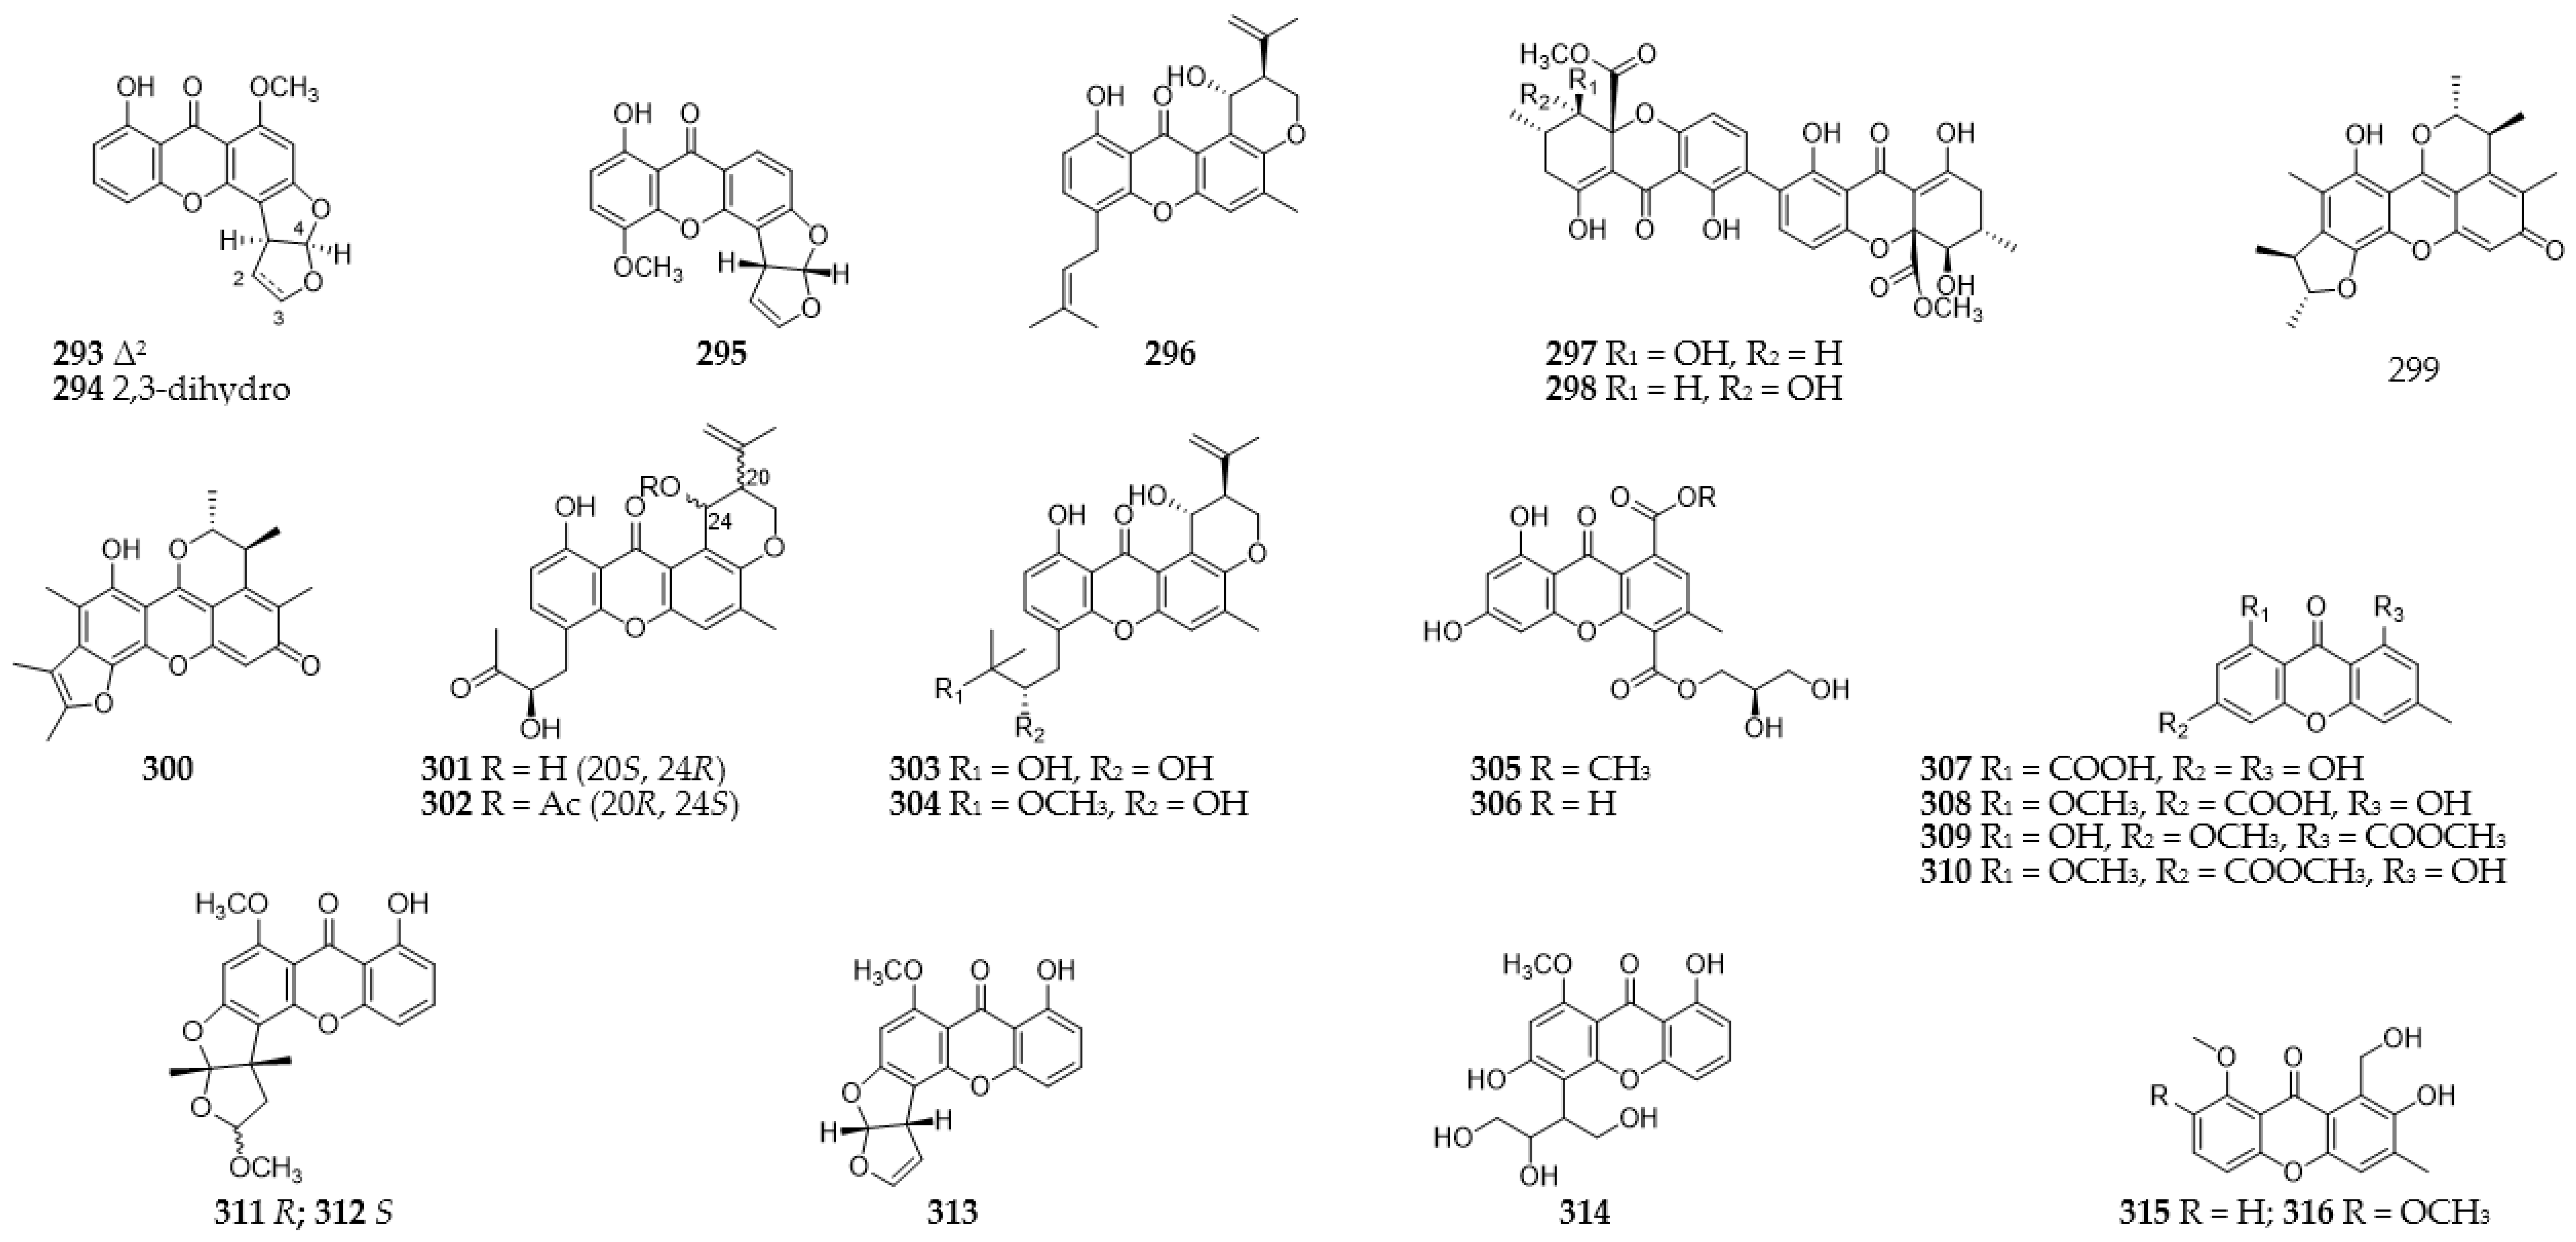 JoF | Free Full-Text | Polyketides as Secondary Metabolites from 